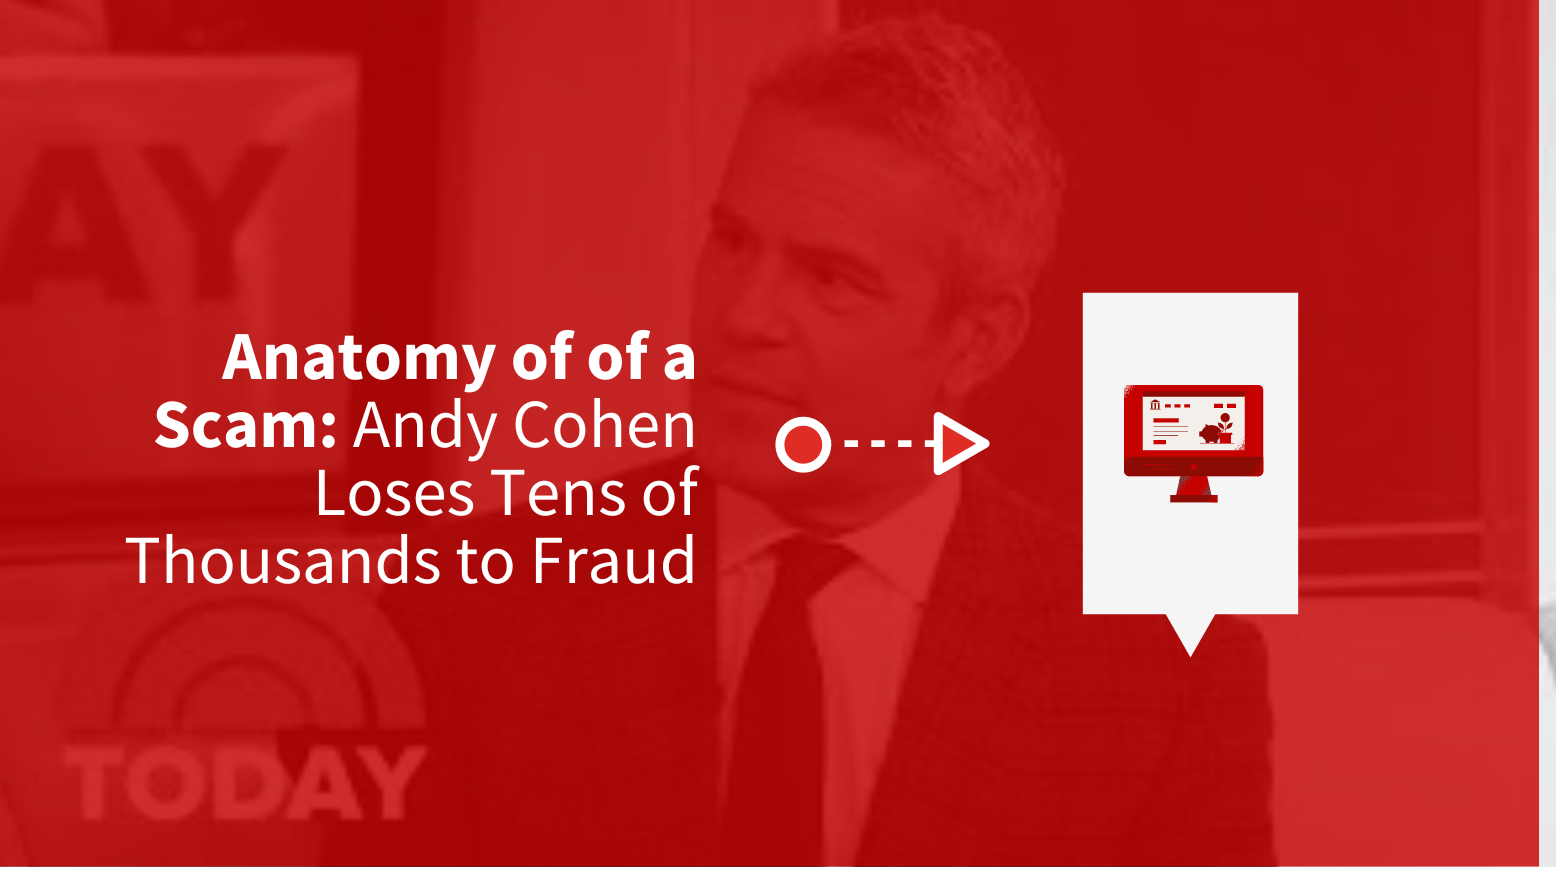 red graphic that says Anatomy of a Scam: Andy Cohen loses tens of thousands to fraud